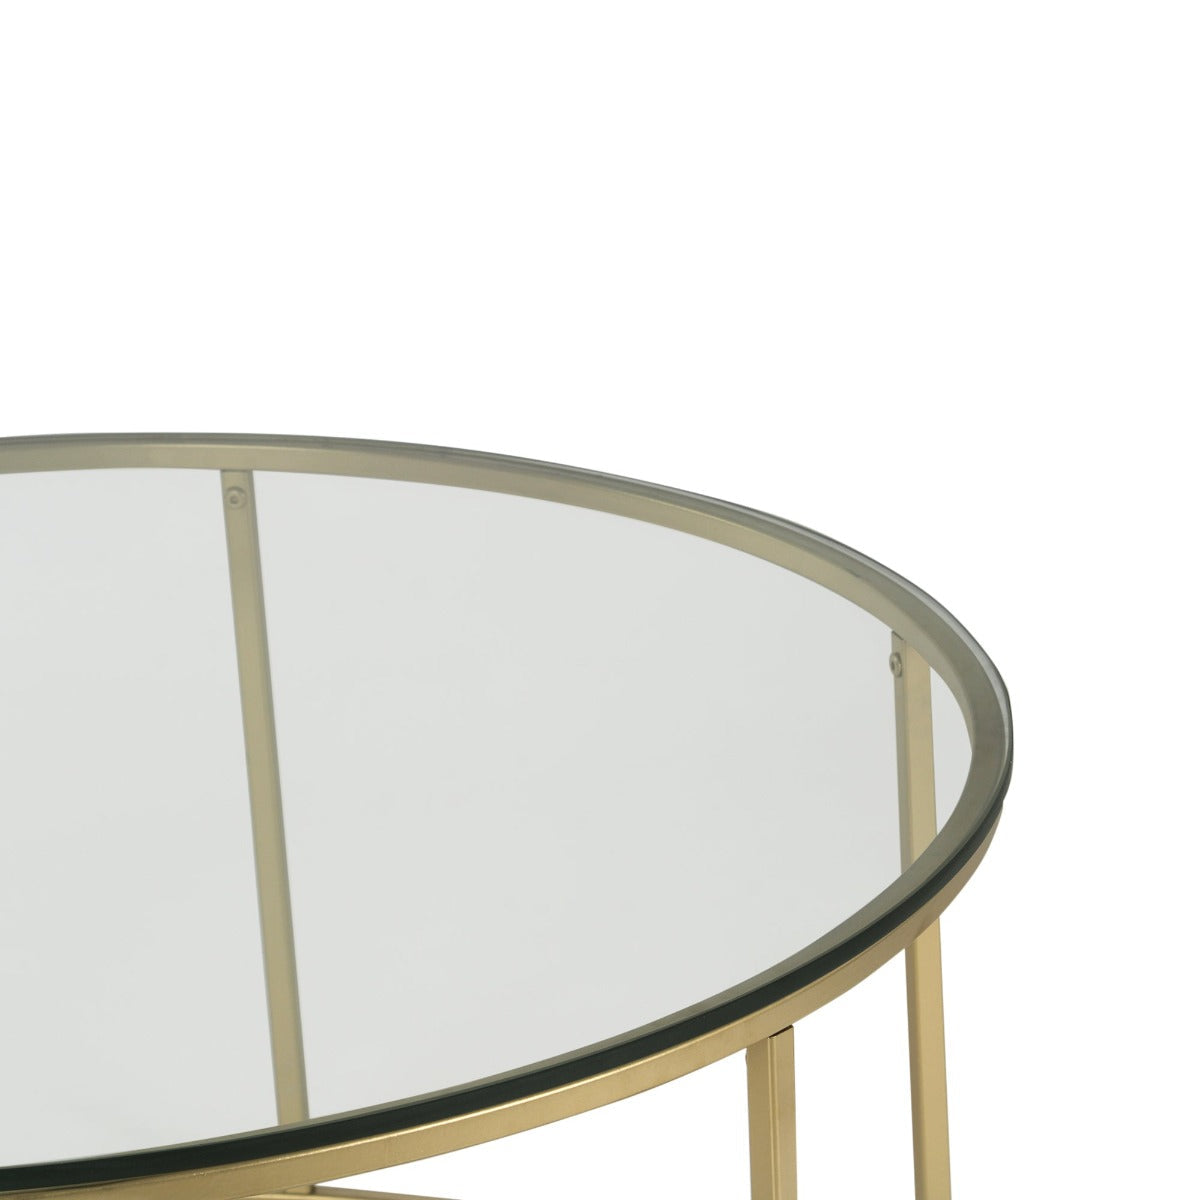 Noah Glass Coffee Table In Gold Finish